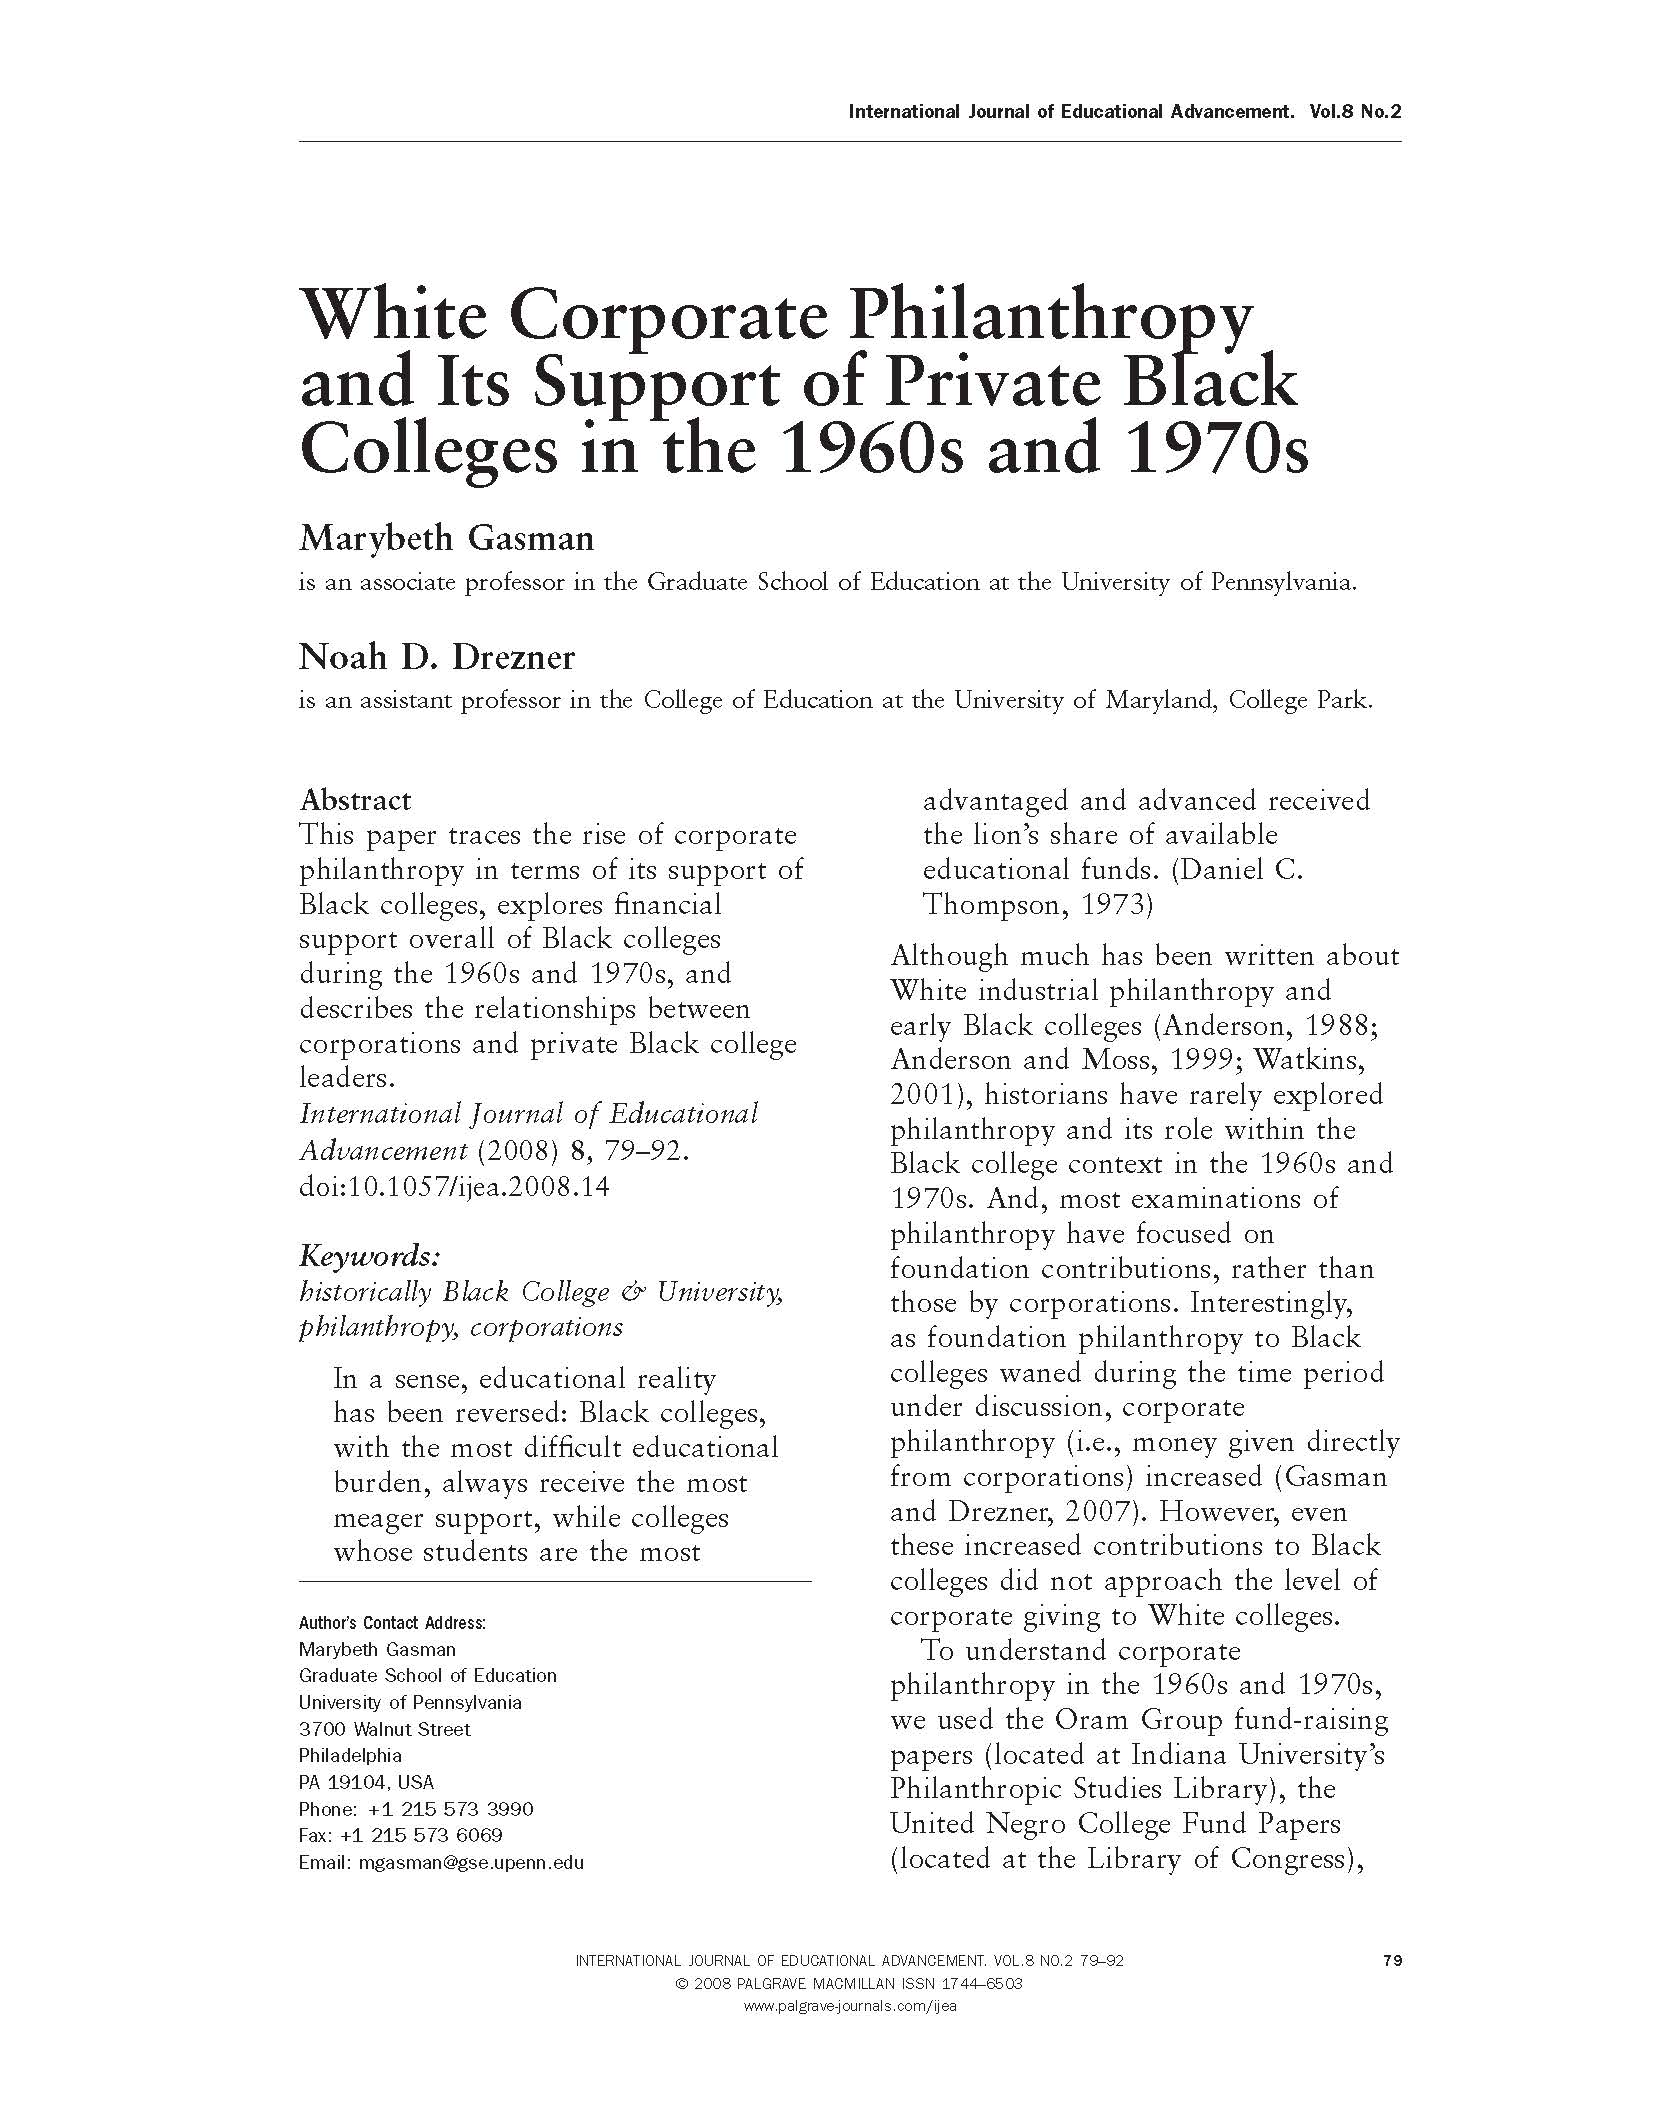 White corporate philanthropy and its support of private Black colleges in the 1960s and 70s